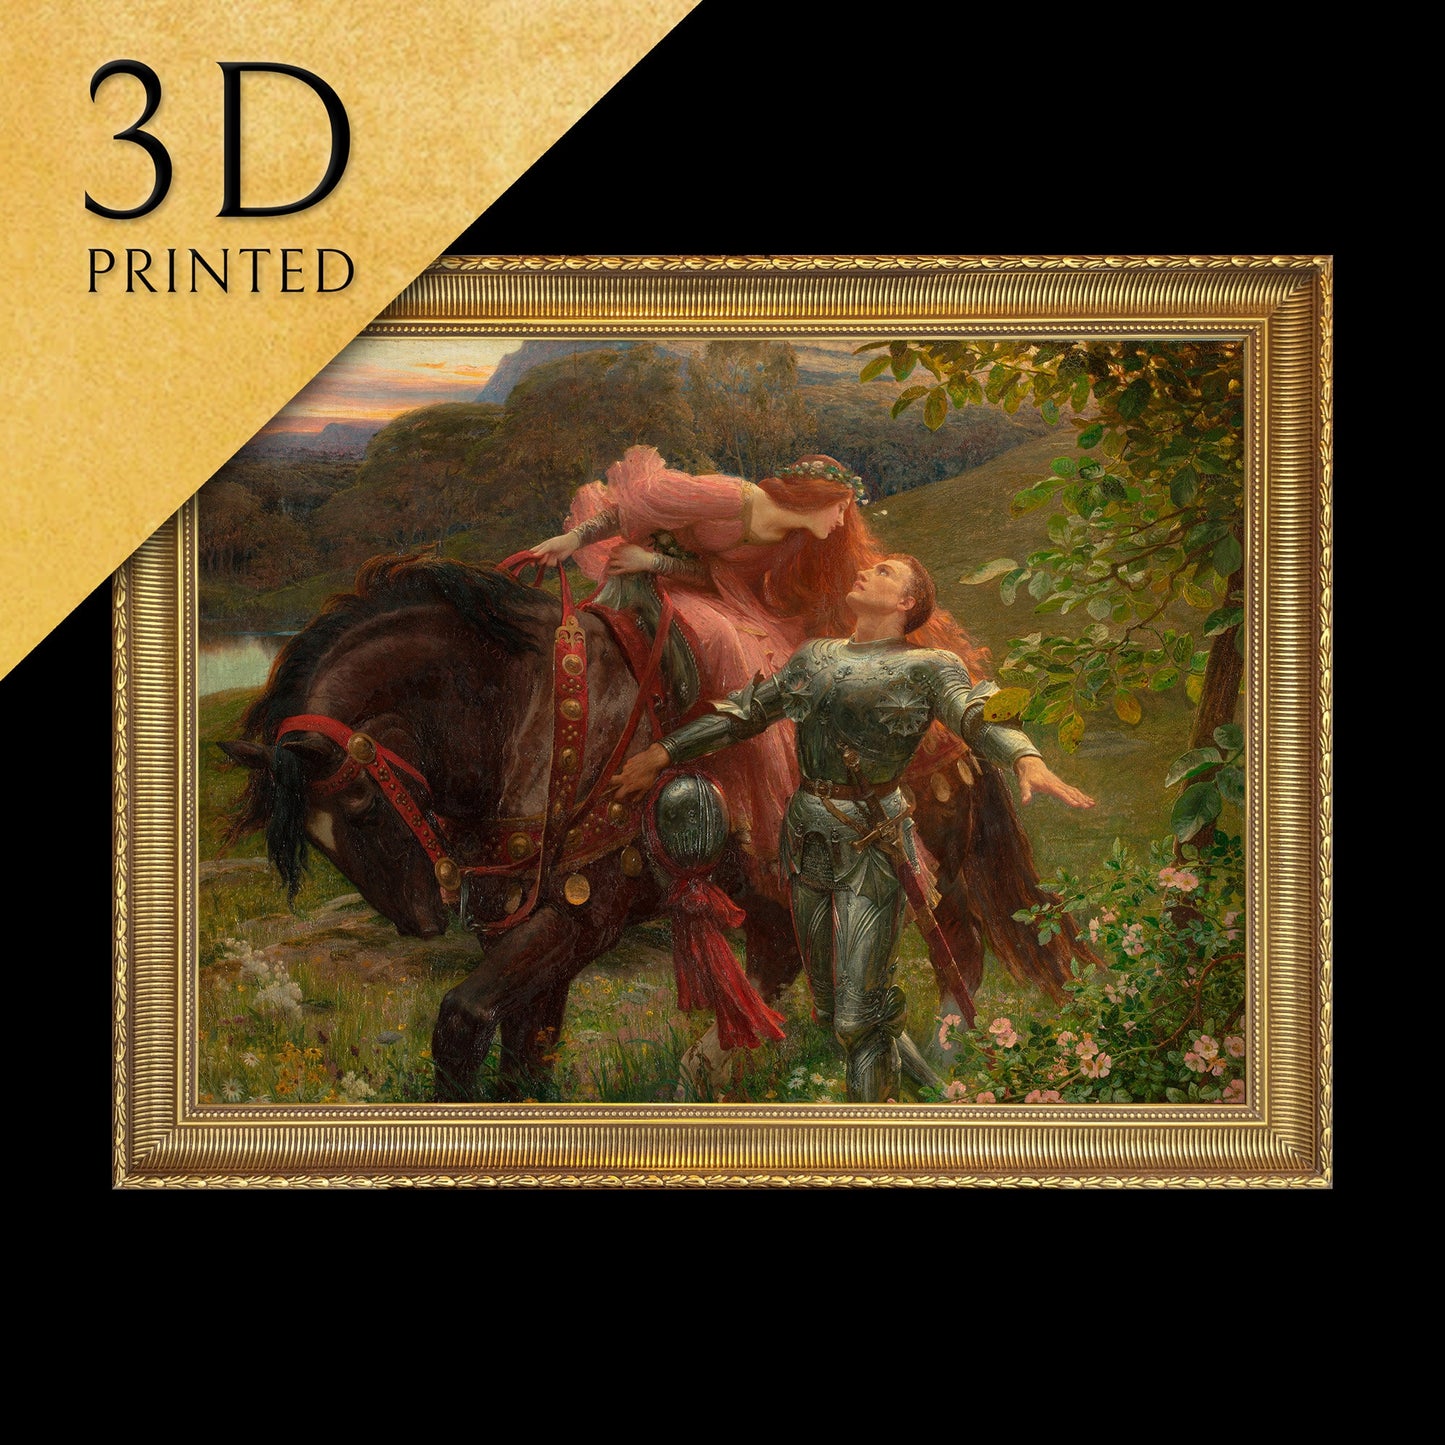 La Belle Dame sans Merci by Frank Dicksee, 3d Printed with texture and brush strokes looks like original oil-painting, code:237